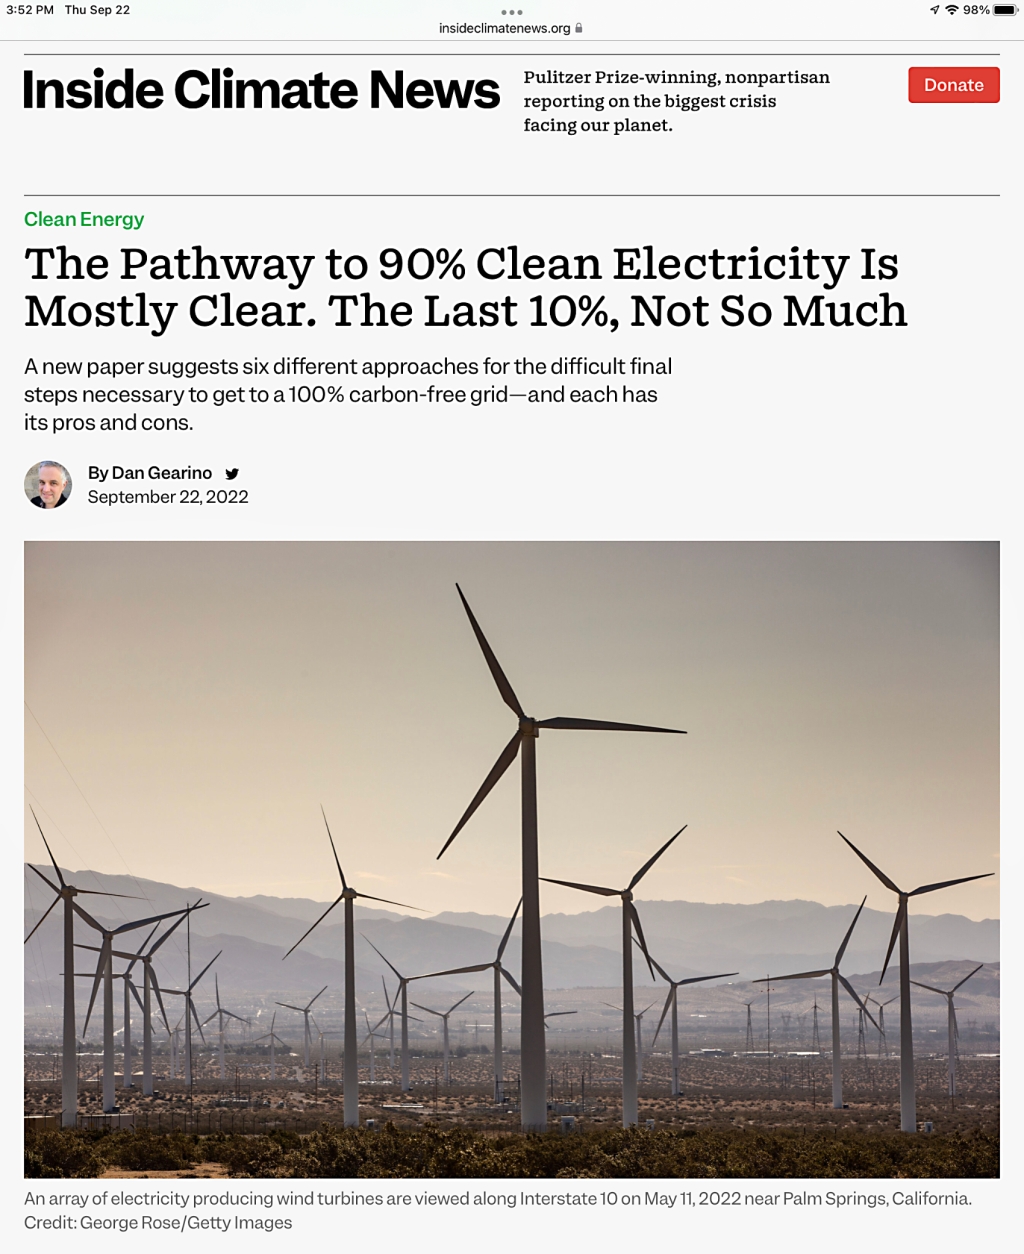 The Pathway to 90% Clean Electricity Is Mostly Clear. The Last 10%, Not So Much, 09.22.22 via Inside Climate News https://insideclimatenews.org/news/22092022/inside-clean-energy-last-10-percent/